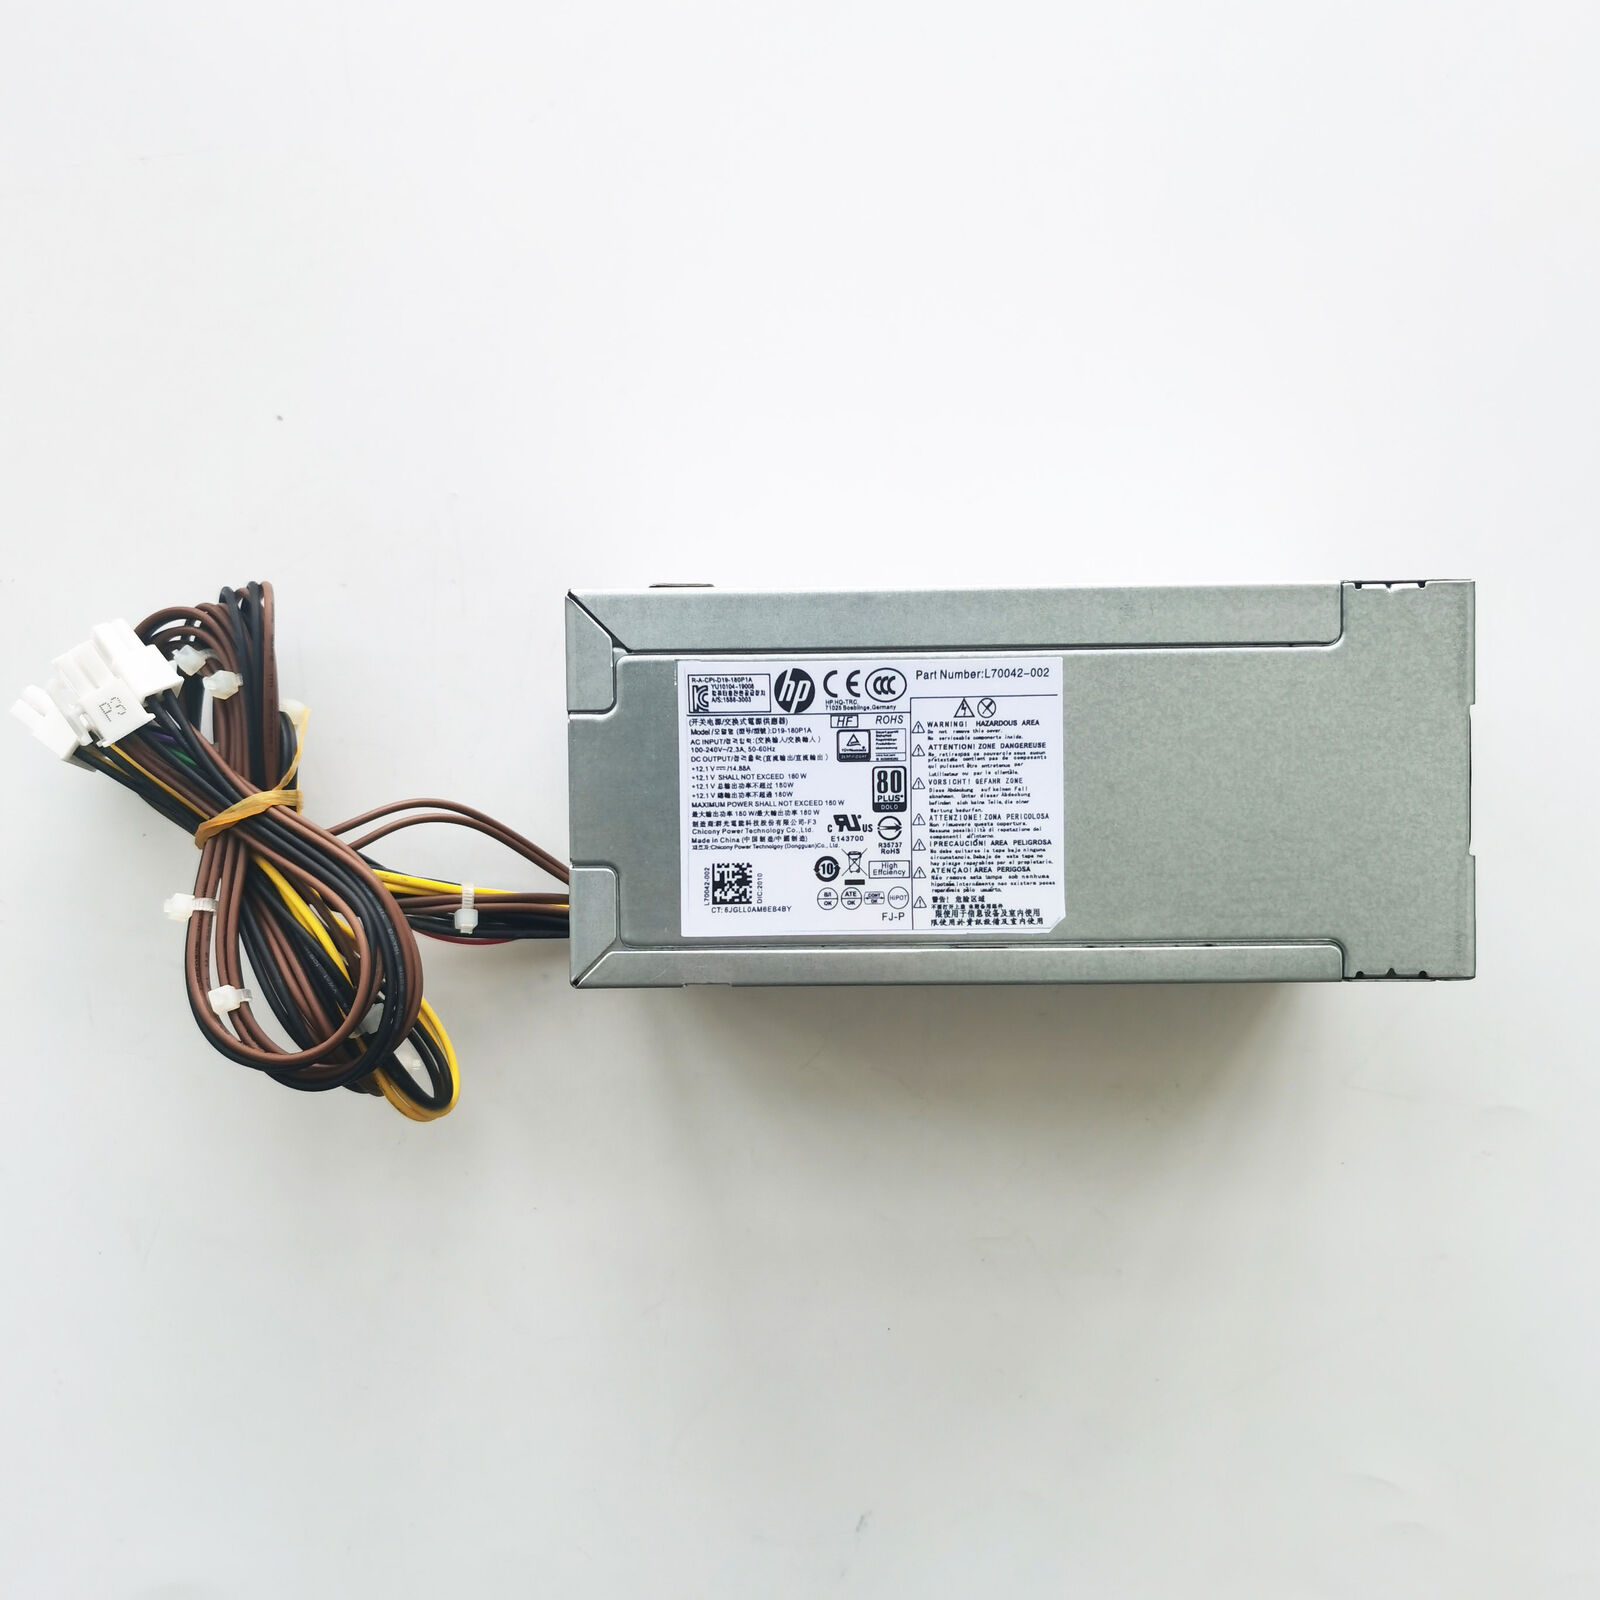 For HP ZHAN99PRO A G4MT SFF 180W Power Supply hk280-85PP L70042-004 L70042-002